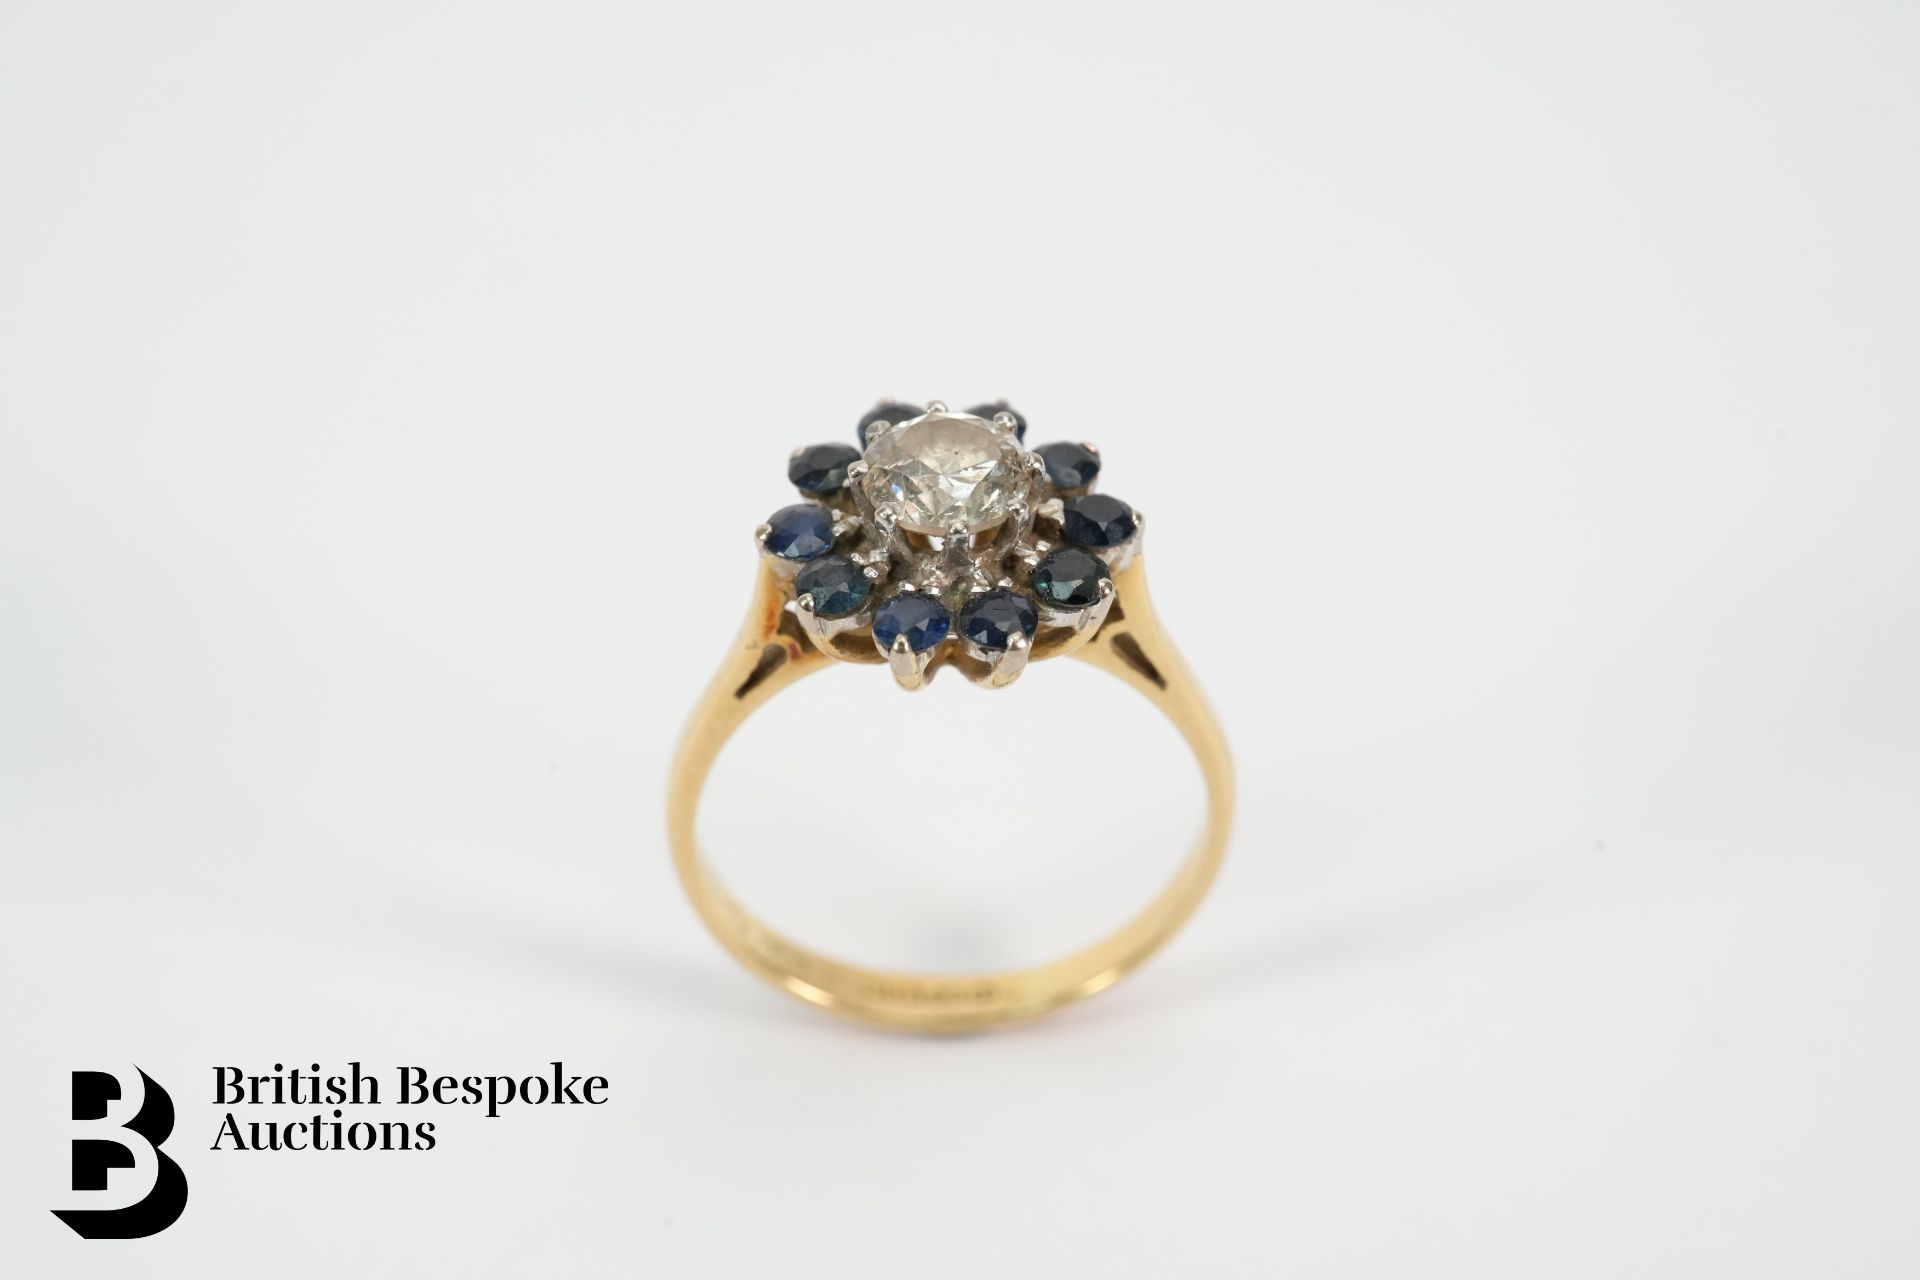 18ct Yellow Gold Diamond and Sapphire Ring - Image 3 of 3